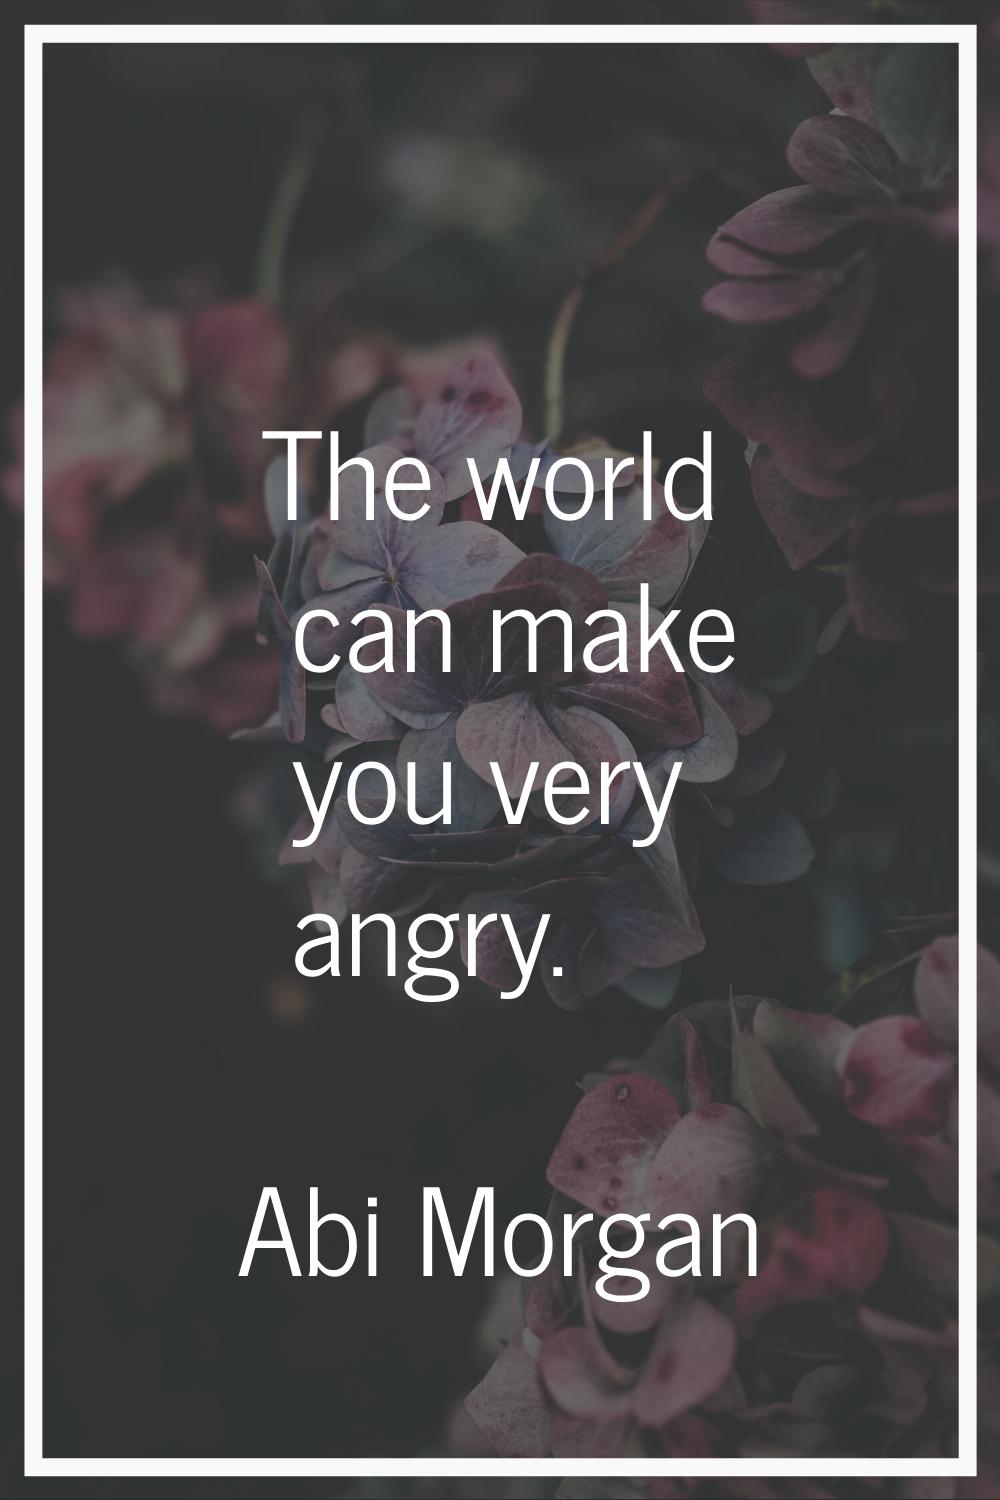 The world can make you very angry.